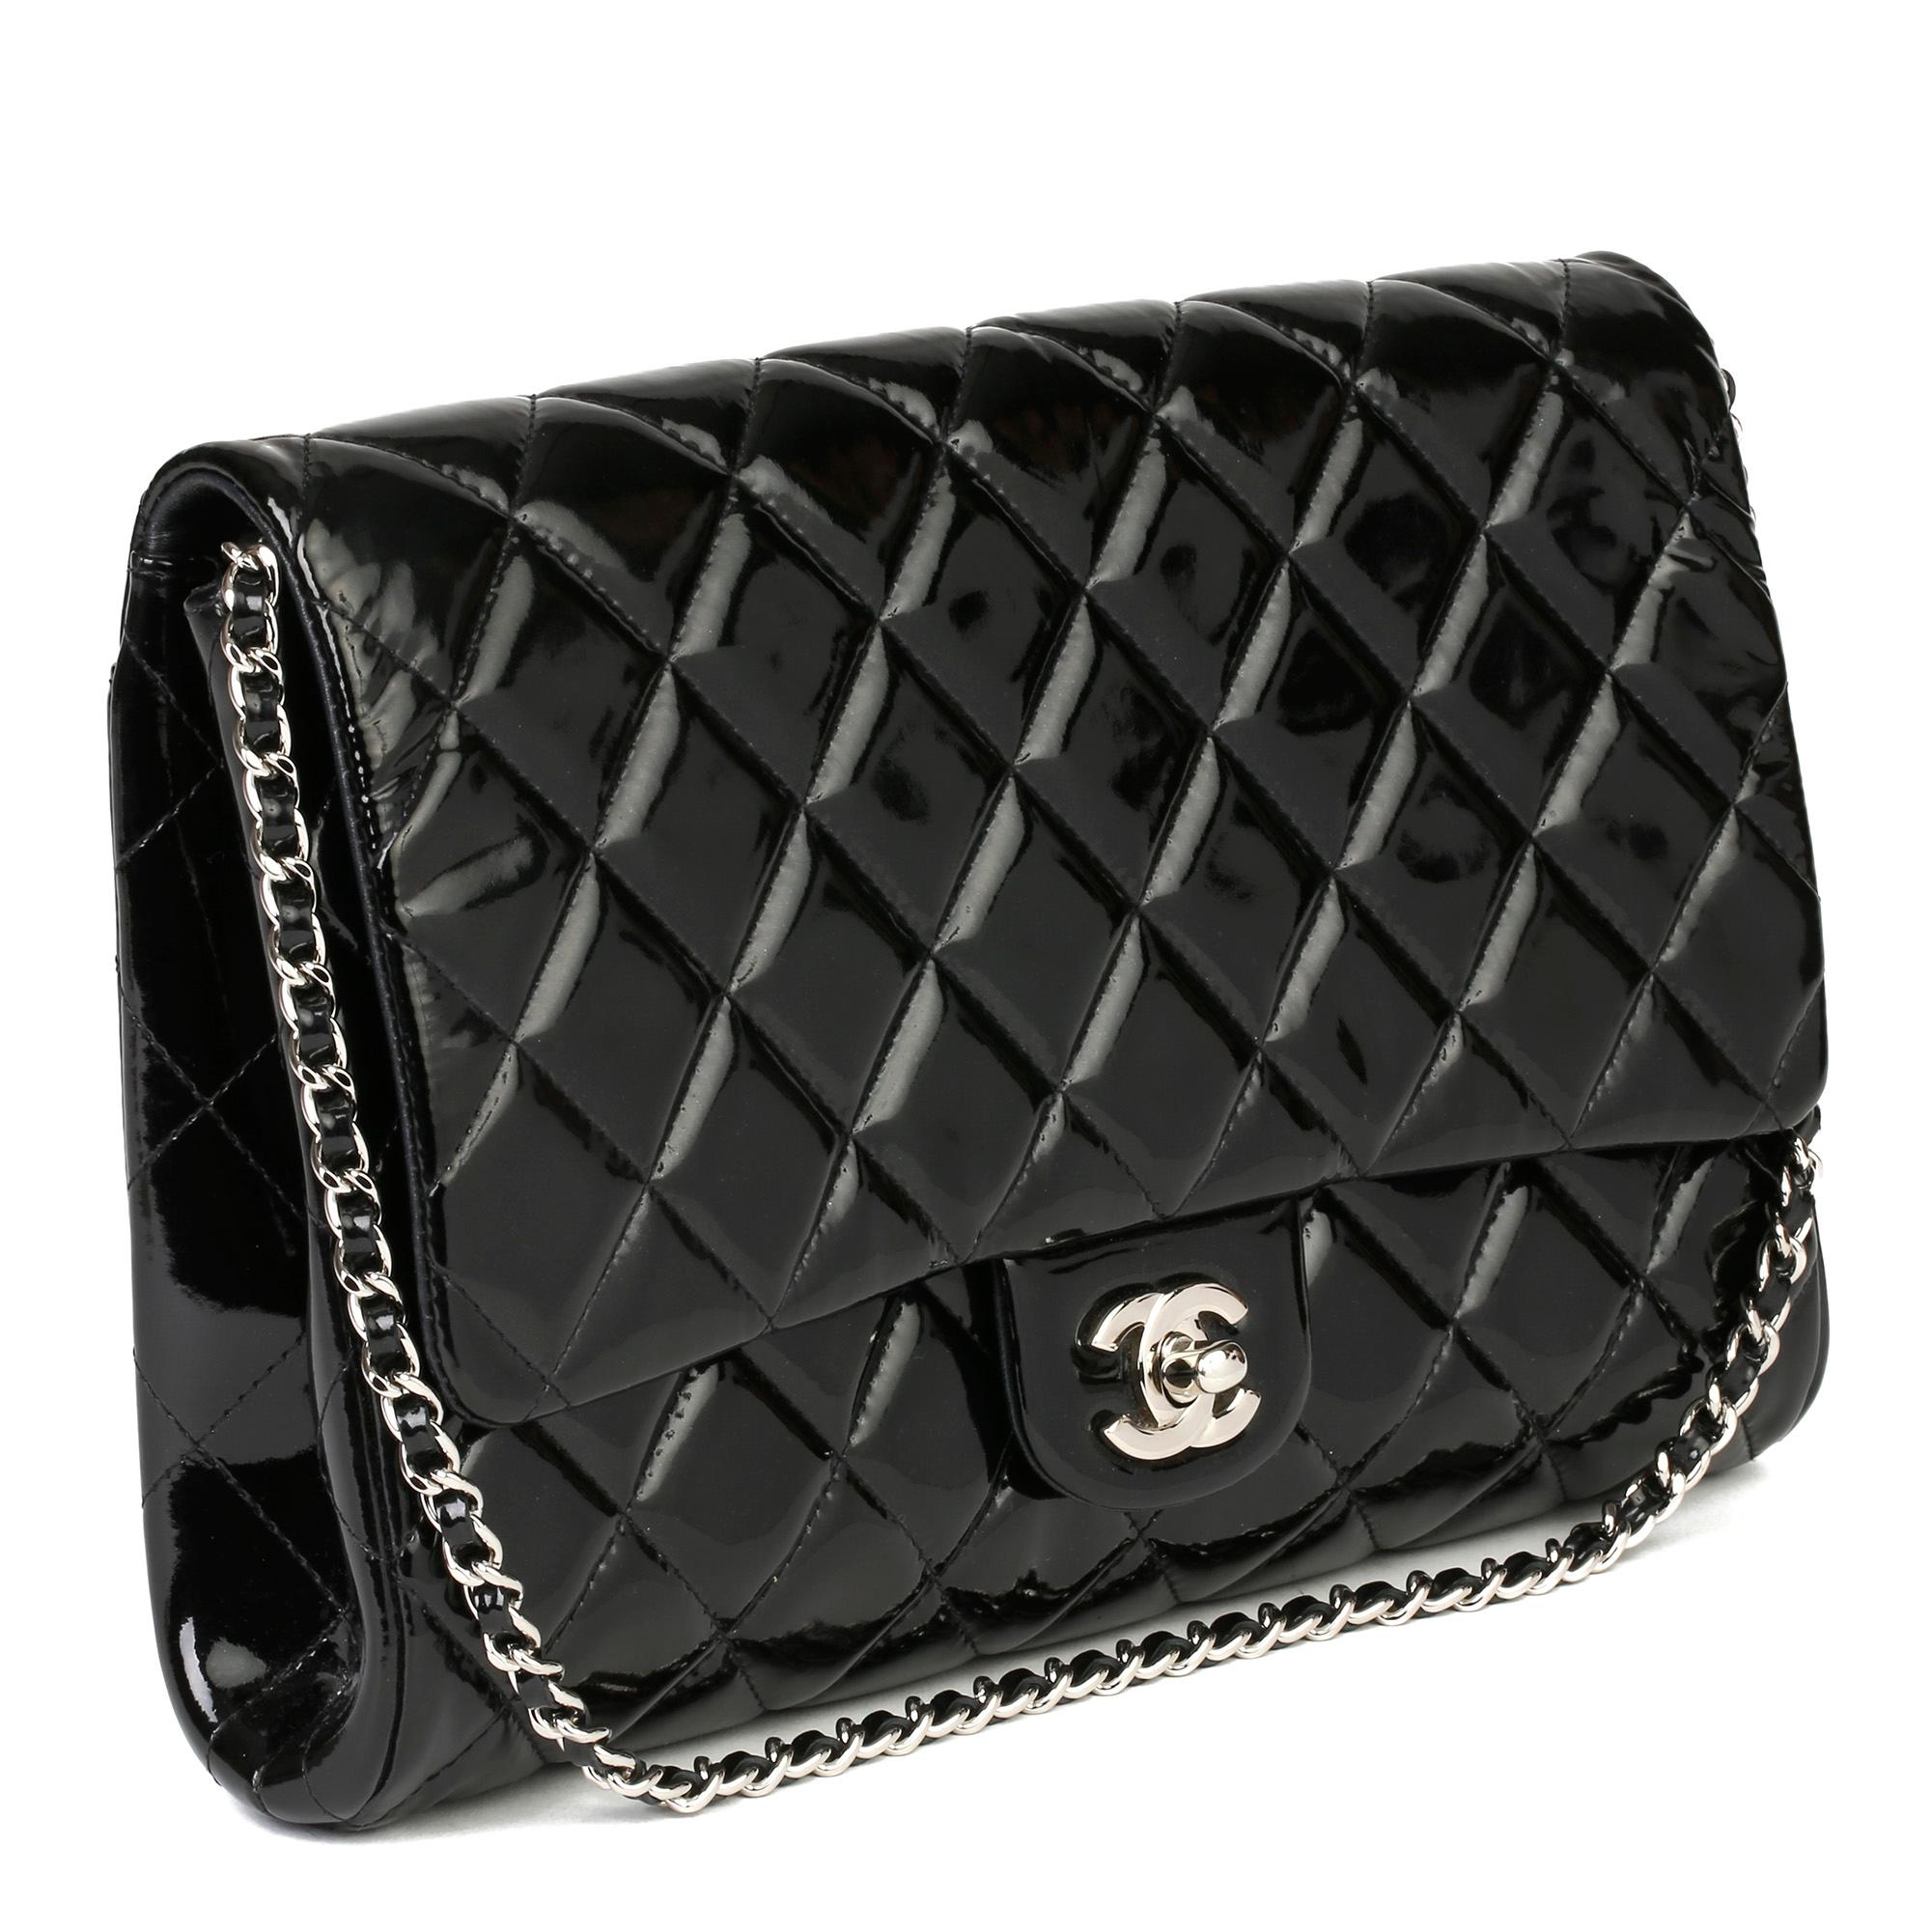 CHANEL
Black Quilted Patent Leather Classic Clutch on Chain

Xupes Reference: HB3915
Serial Number: 17548973
Age (Circa): 2012
Accompanied By: Chanel Dust Bag, Authenticity Card, Care Booklet, Protective Felt
Authenticity Details: Authenticity Card,